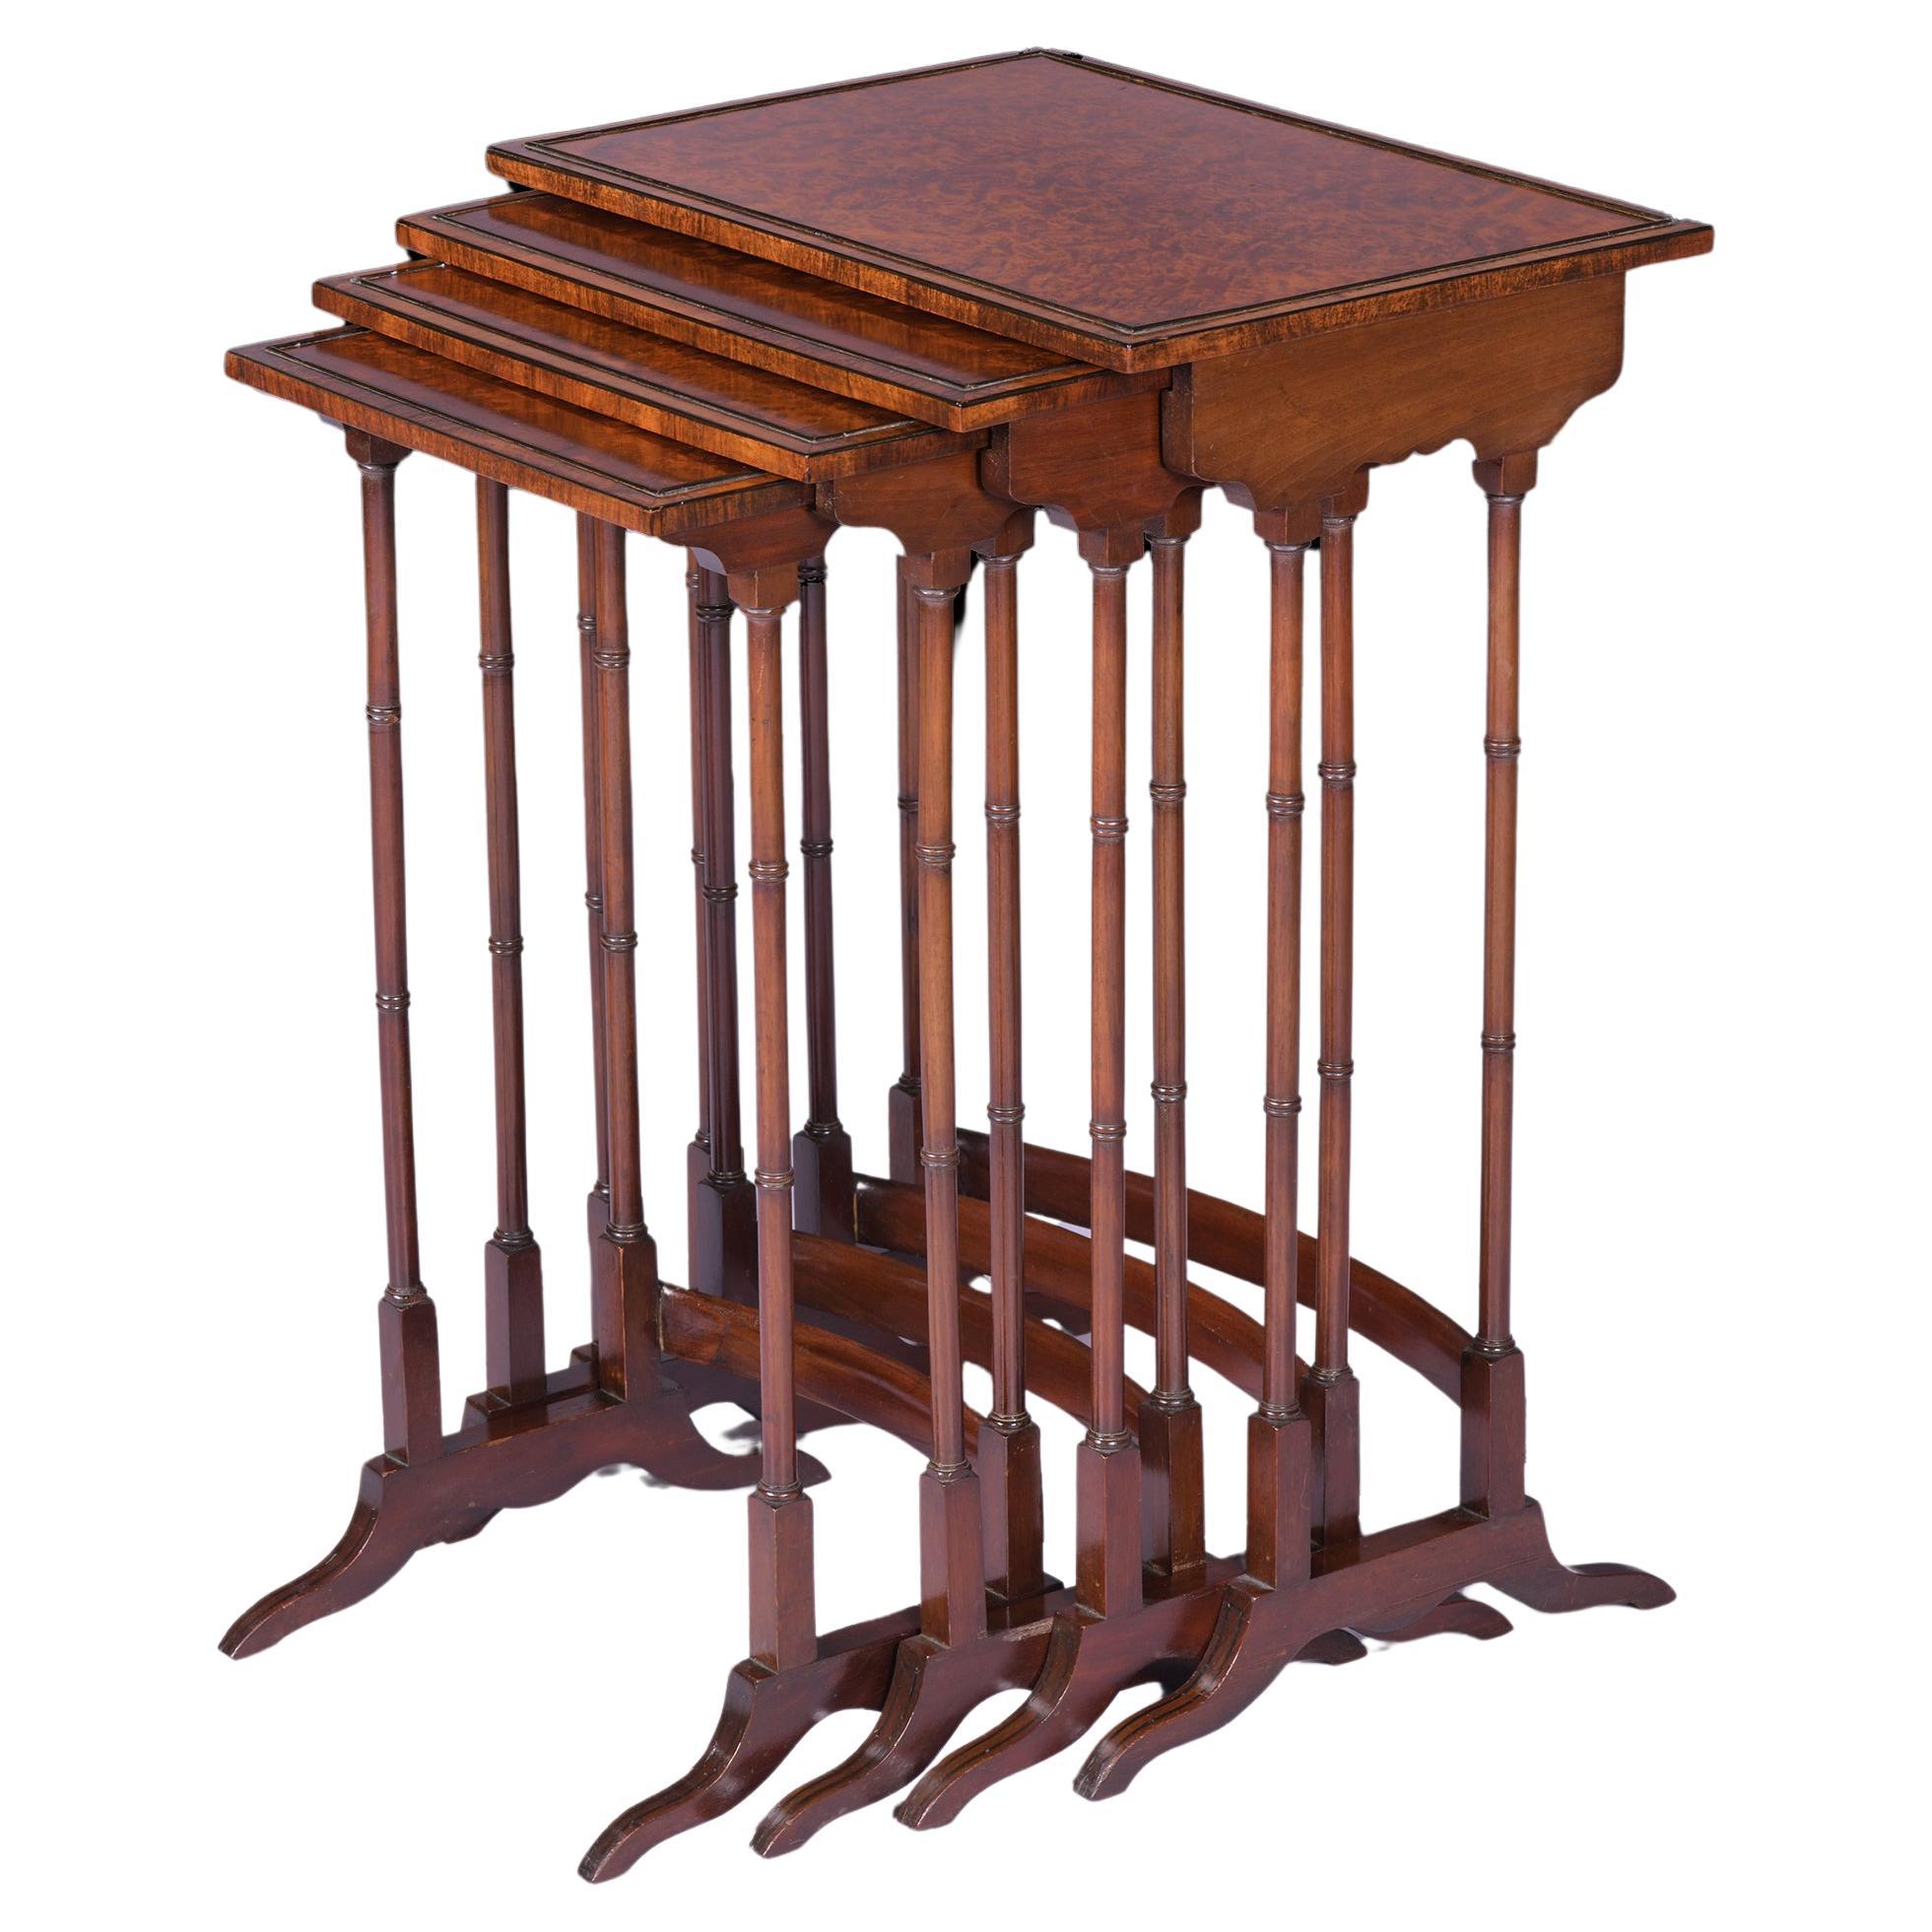 Early 19th Century English Nest of Amboyna Quartette Tables